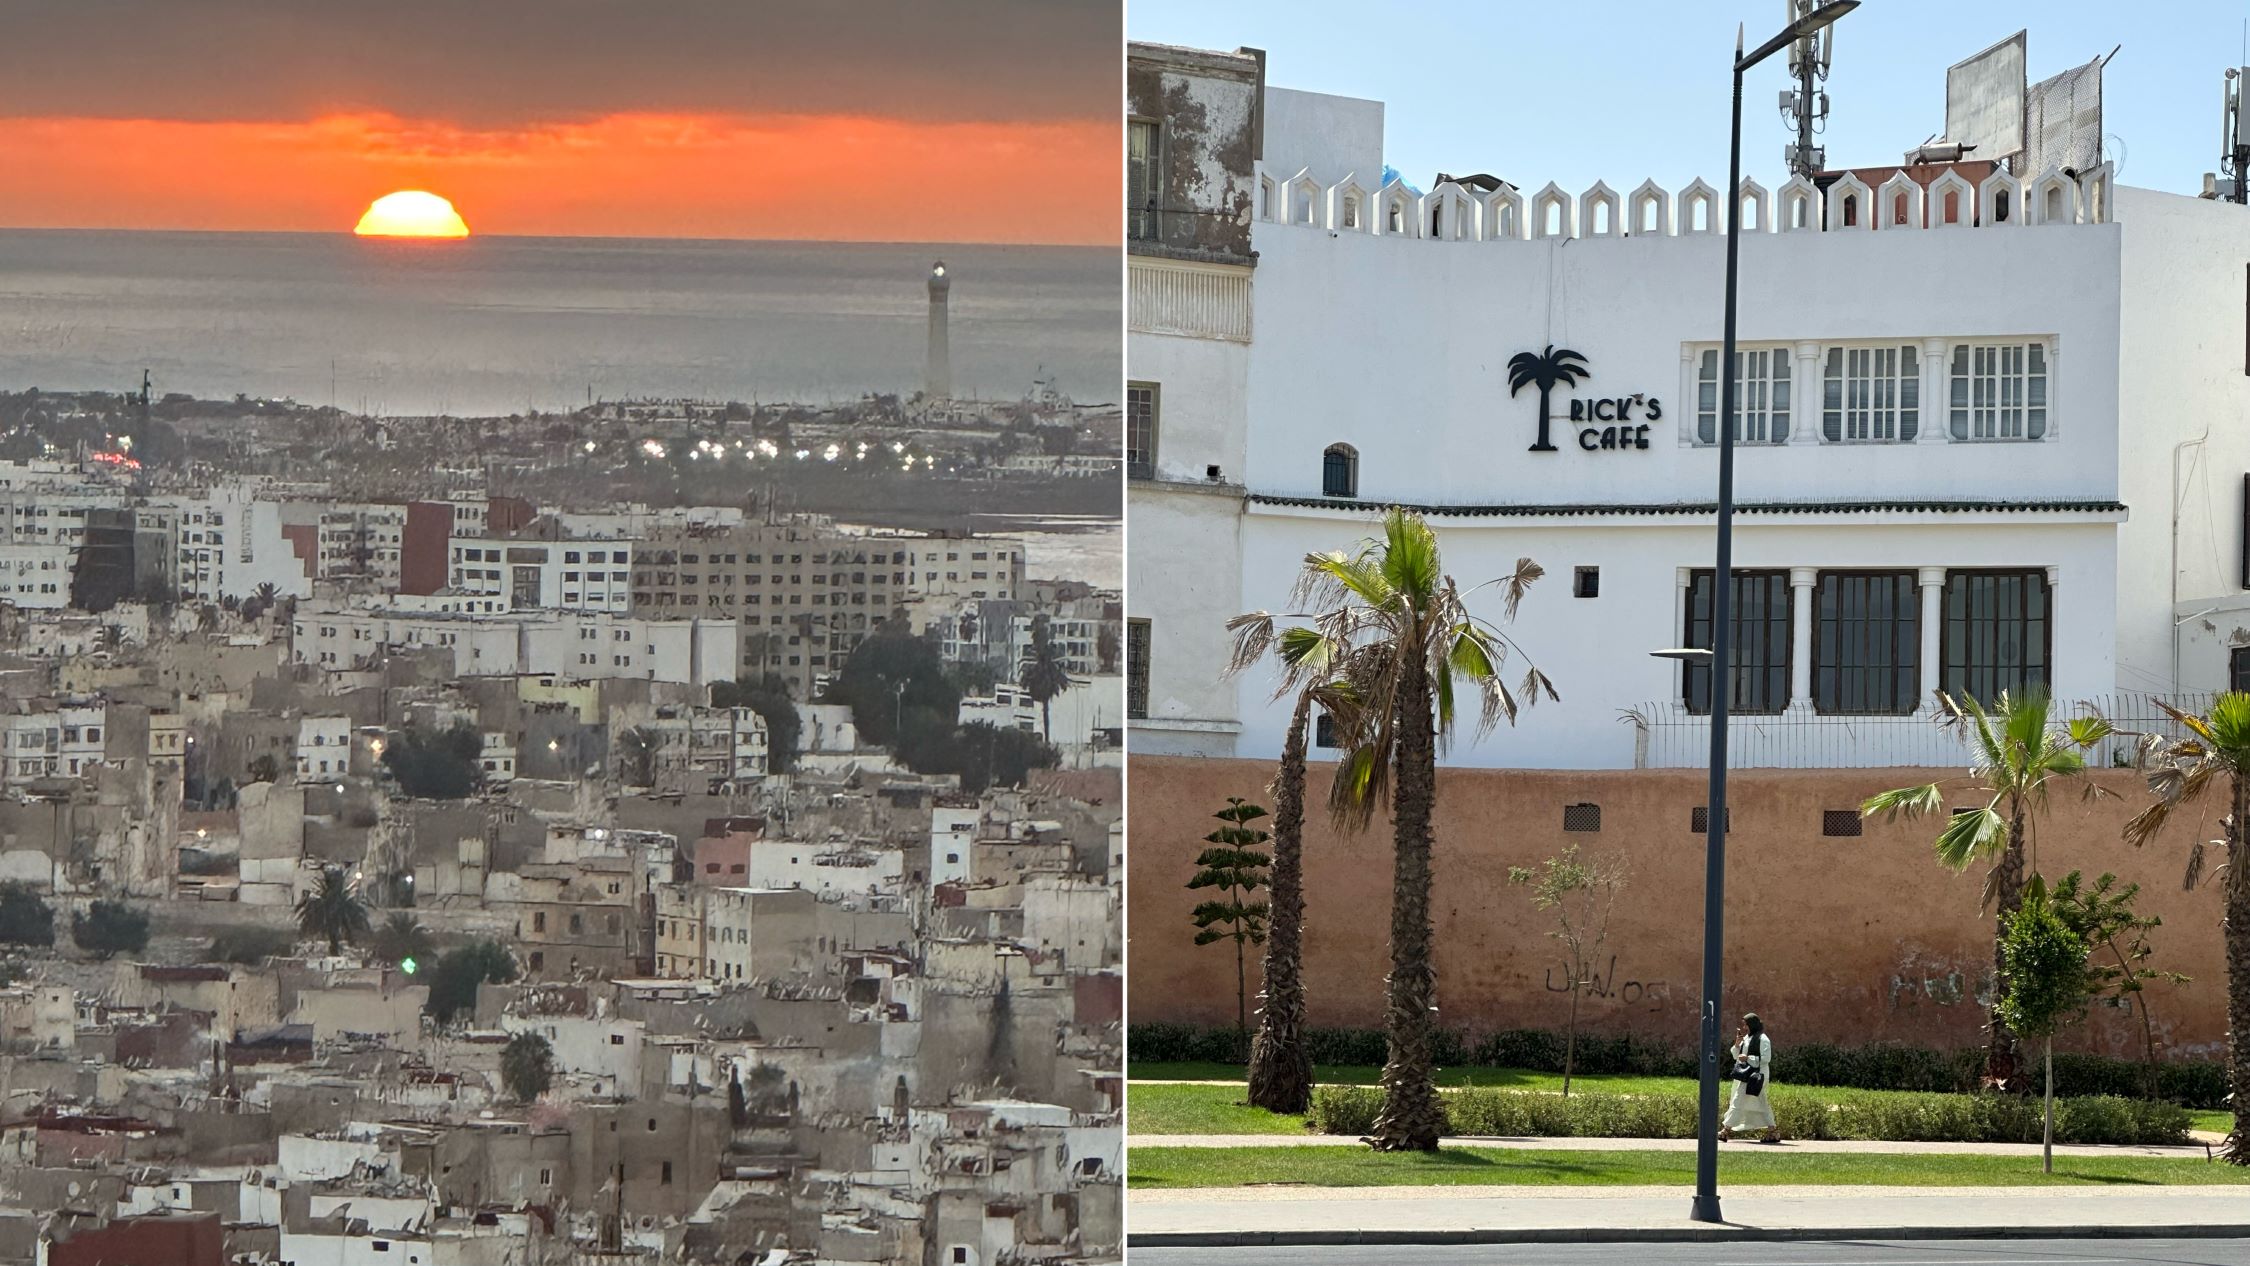 Two images from my Morocco vacation: on the left is a rooftop view of Casablanca with a beautiful sunset in the background. On the right, is the exterior of Rick's Cafe, named after the spot from the movie.